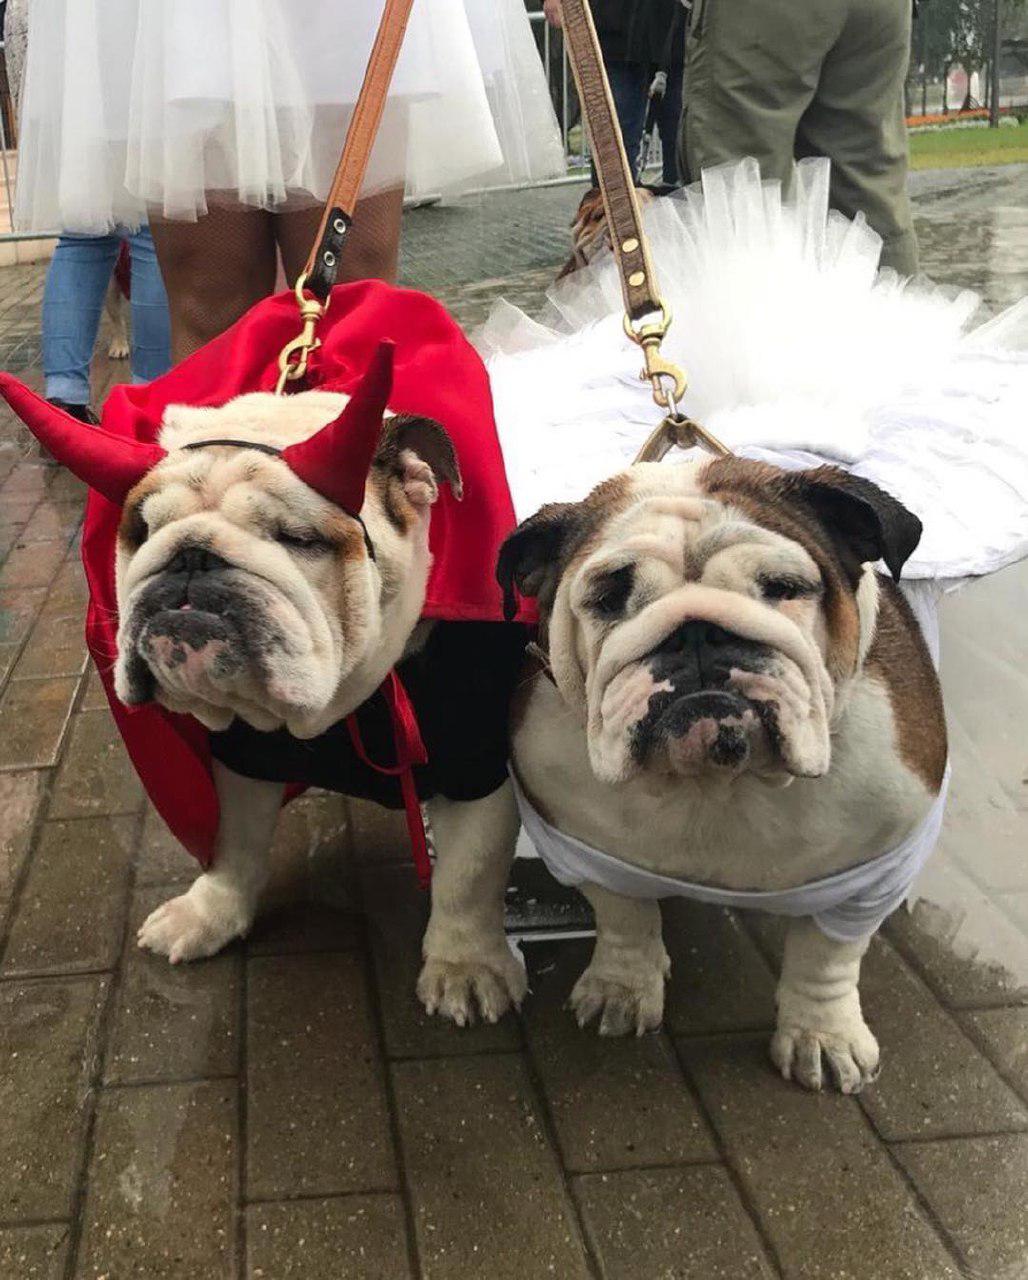 two English Bulldogs in their demon and angel costume while standing on the pavement with a woman behind them